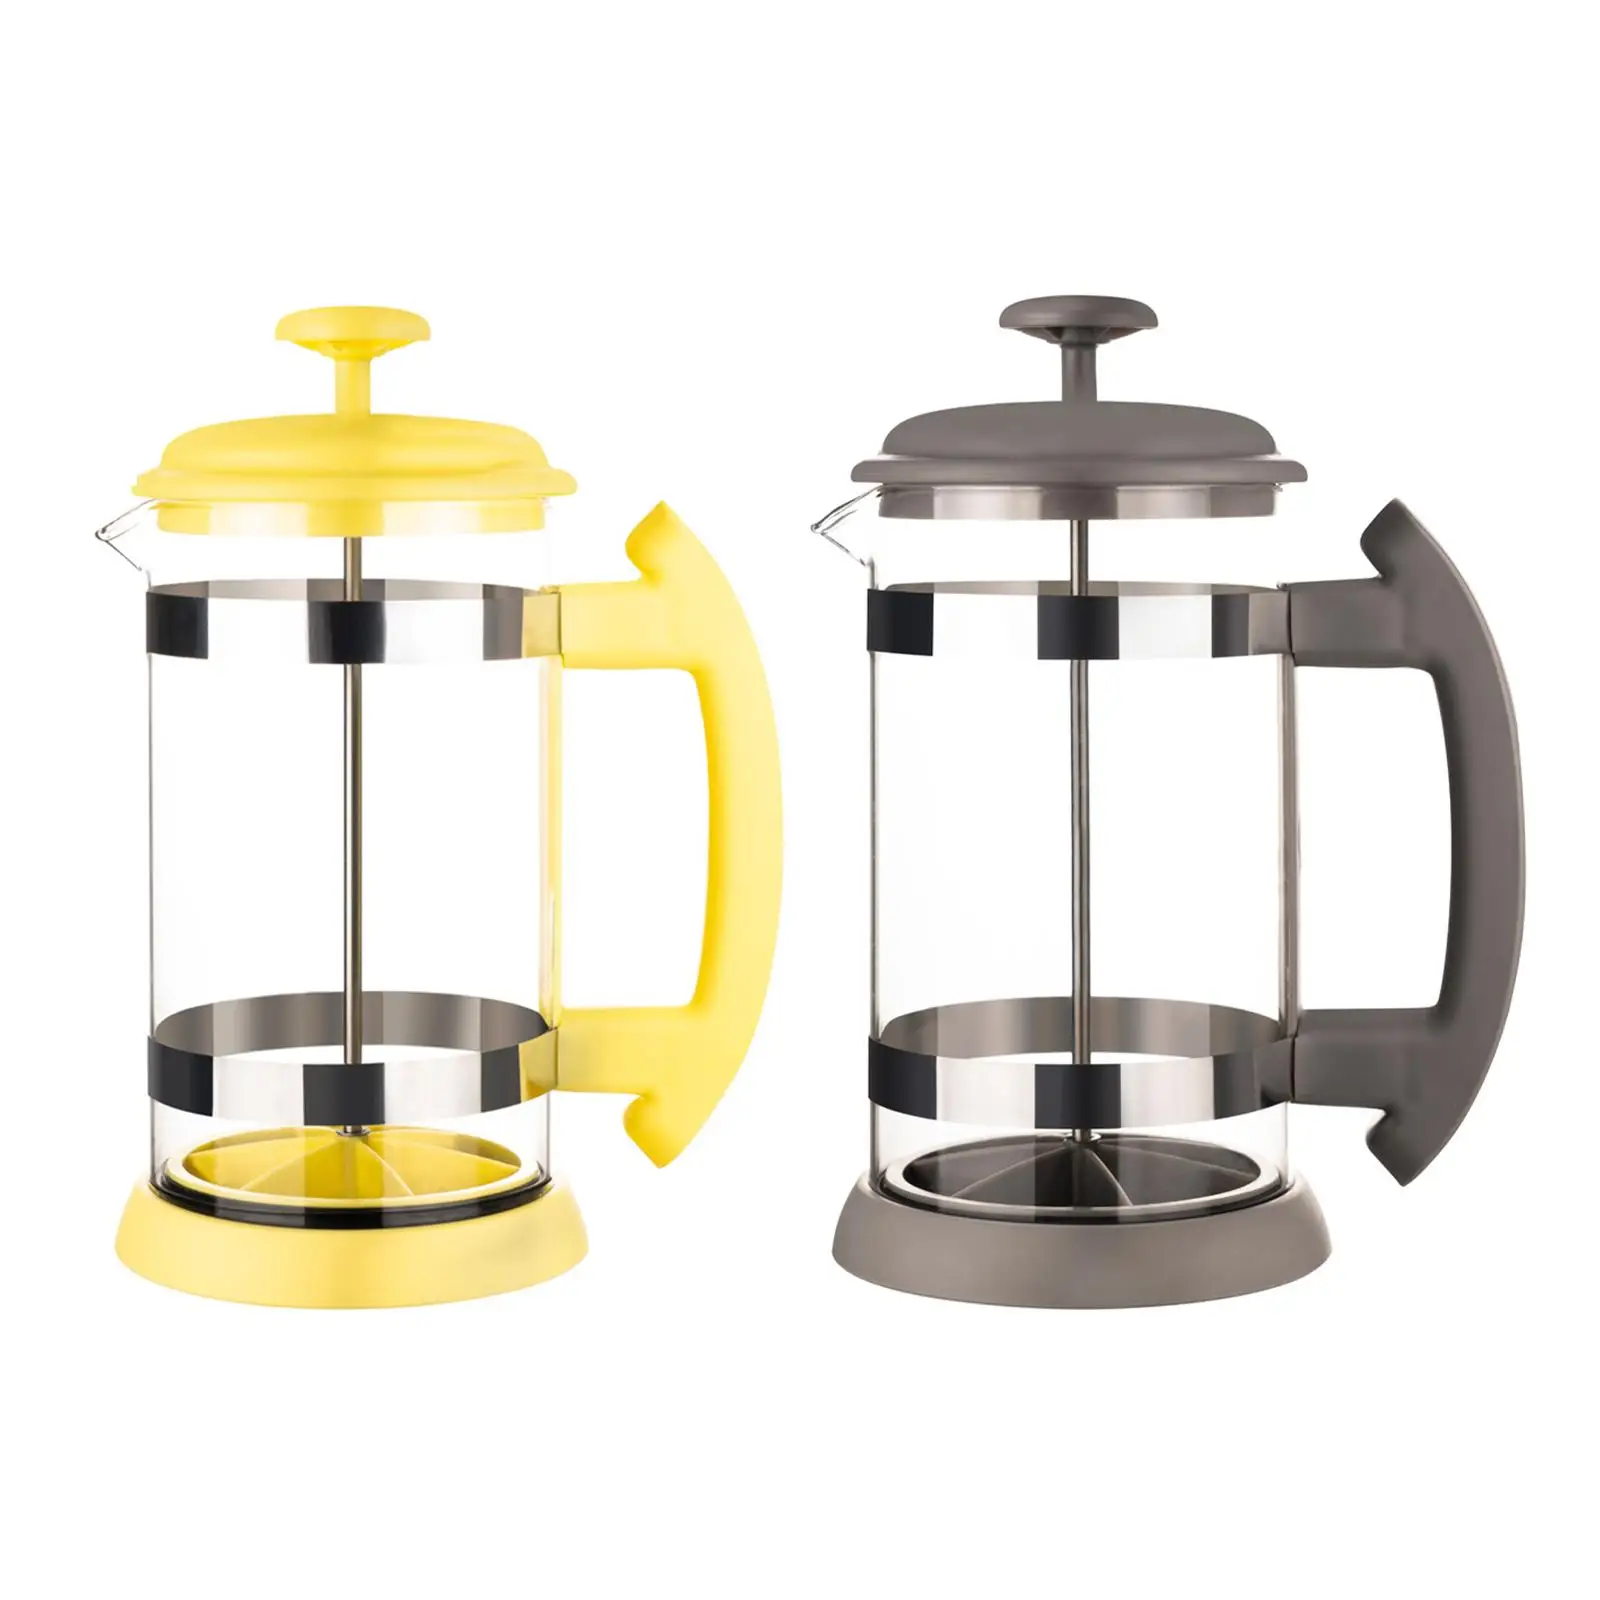 French Press Coffee Maker Heat Resistant 1000ml Coffee Kettle Camping Home